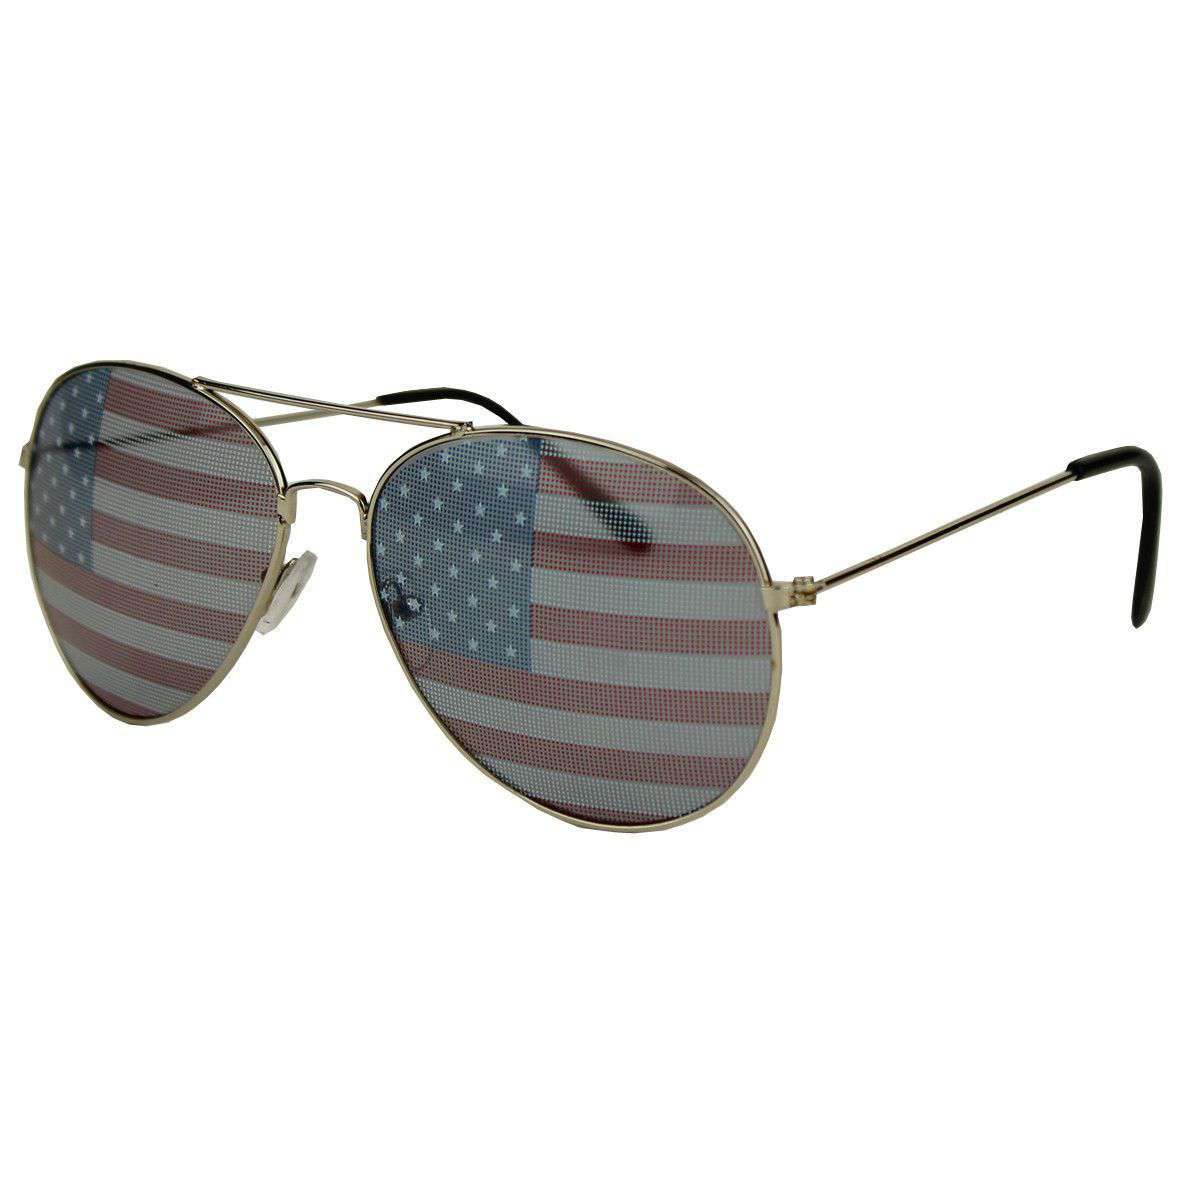 All Enemies Foreign and Domestic "Longshanks" Aviator Shades by Country Club Prep - Country Club Prep